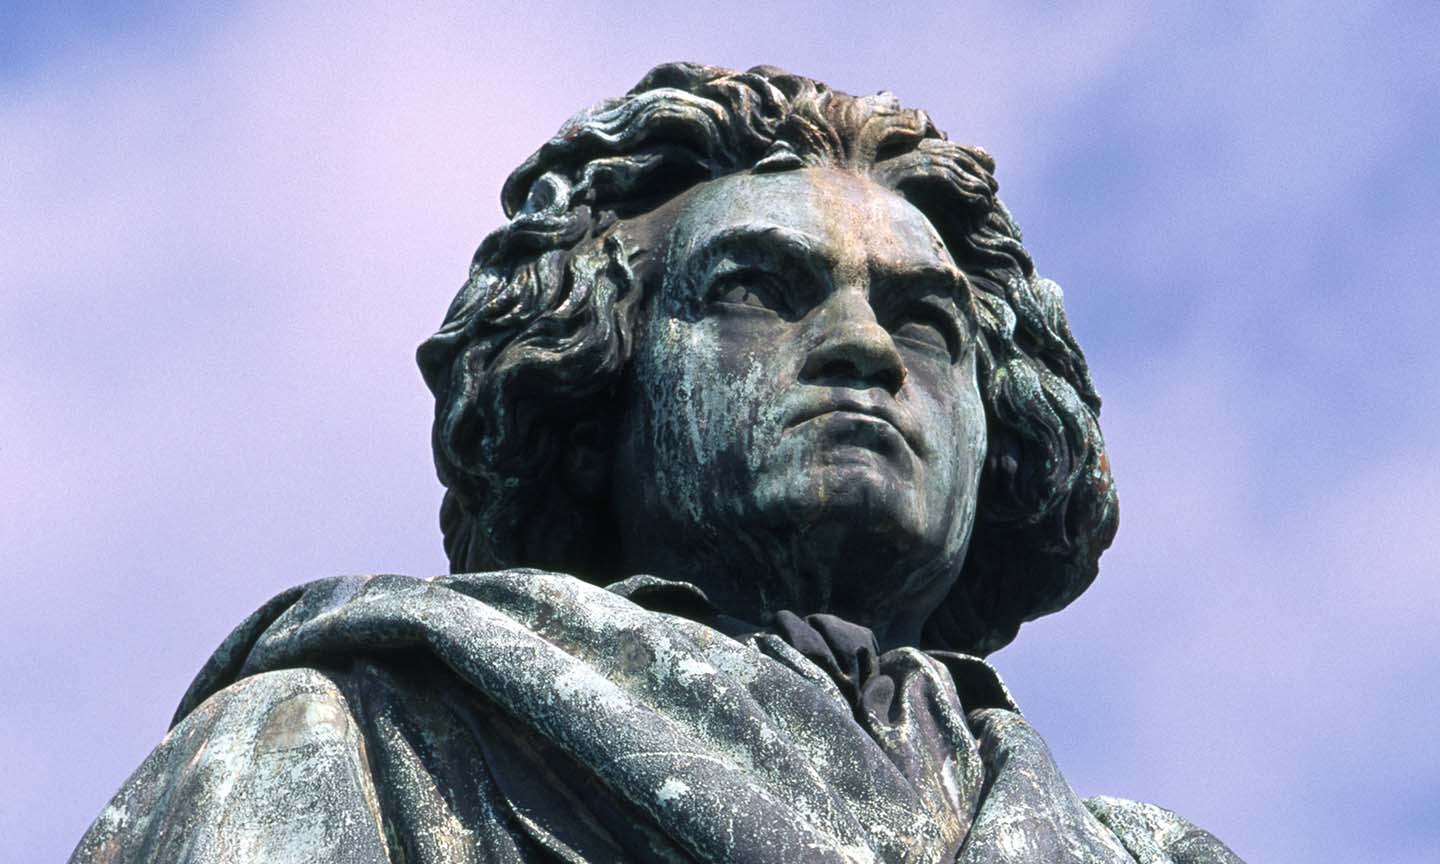 reDiscover Beethoven’s ‘Choral’ Symphony No. 9